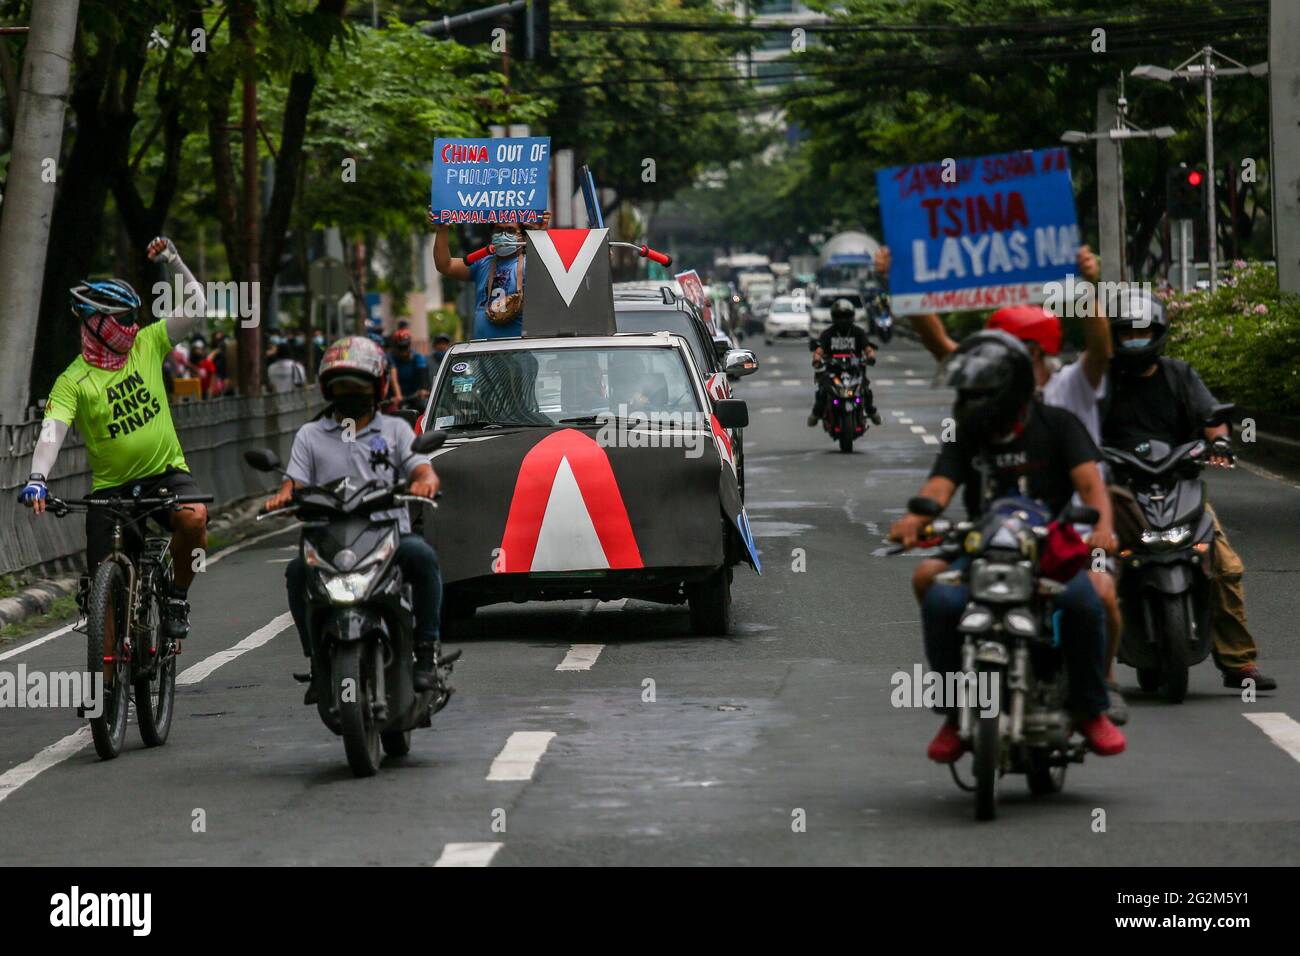 Metro Manila, Philippines. 12th June 2021. Activists carry signs as they hold a motorcade in front of the Chinese Consulate in the financial district of Makati. Various groups called on China to stop its maritime activities in the disputed South China Sea, which endangers peace and stability in the region. Credit: Majority World CIC/Alamy Live News Stock Photo